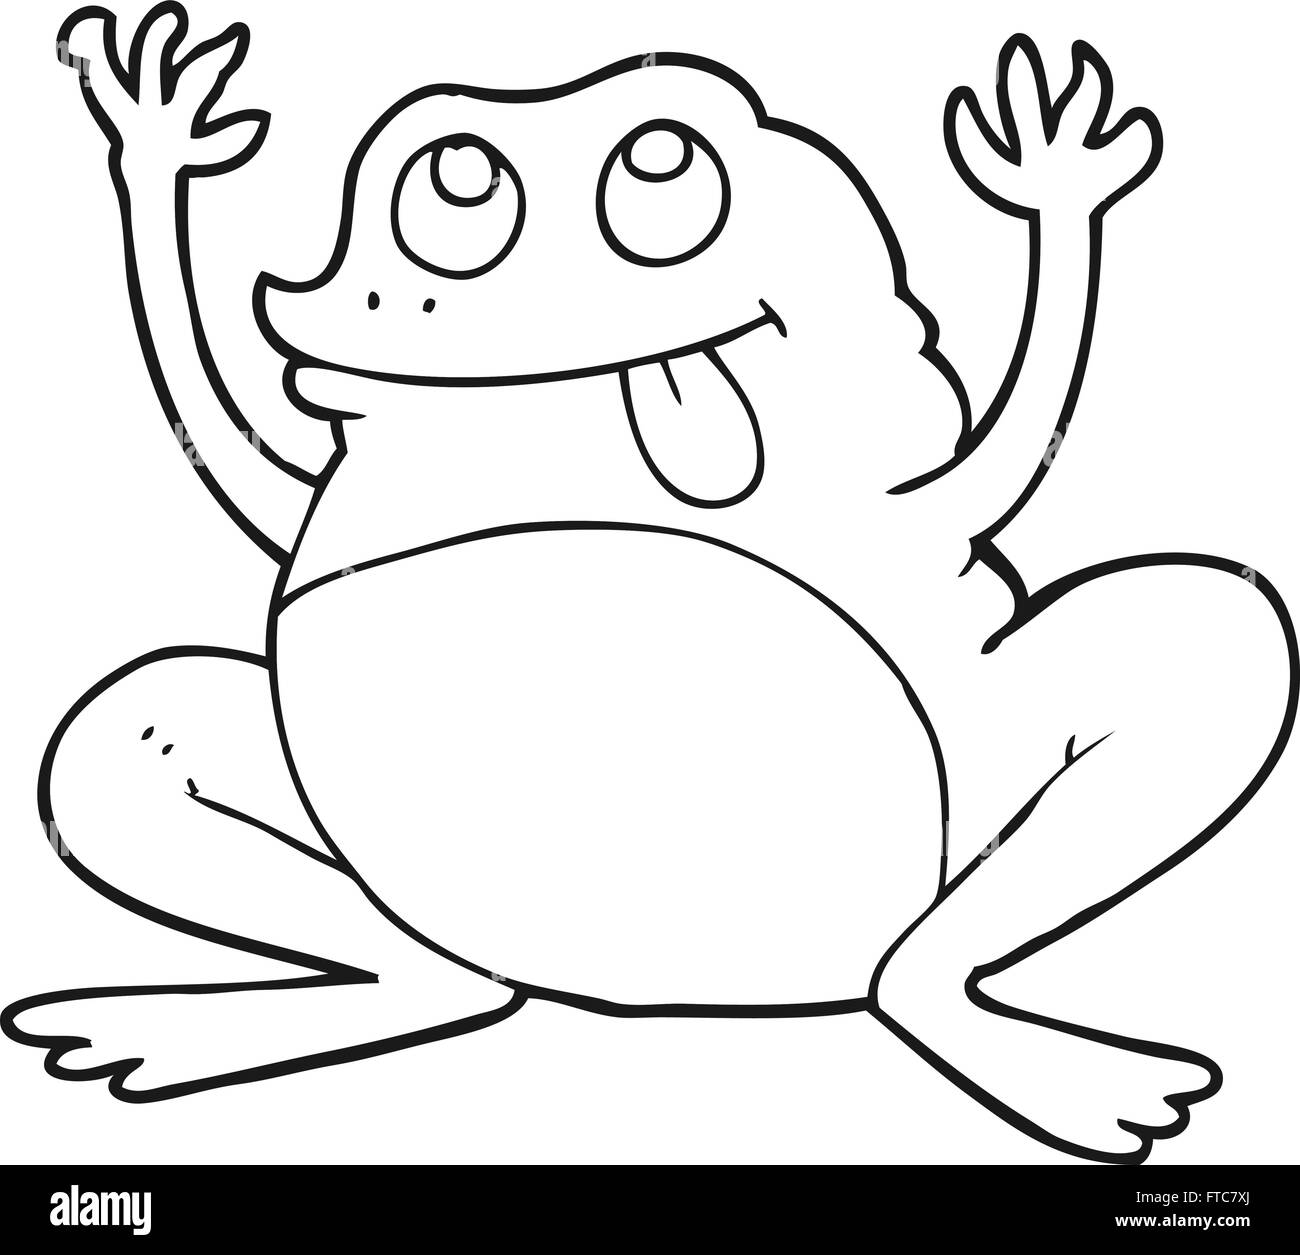 funny freehand drawn black and white cartoon frog Stock Vector